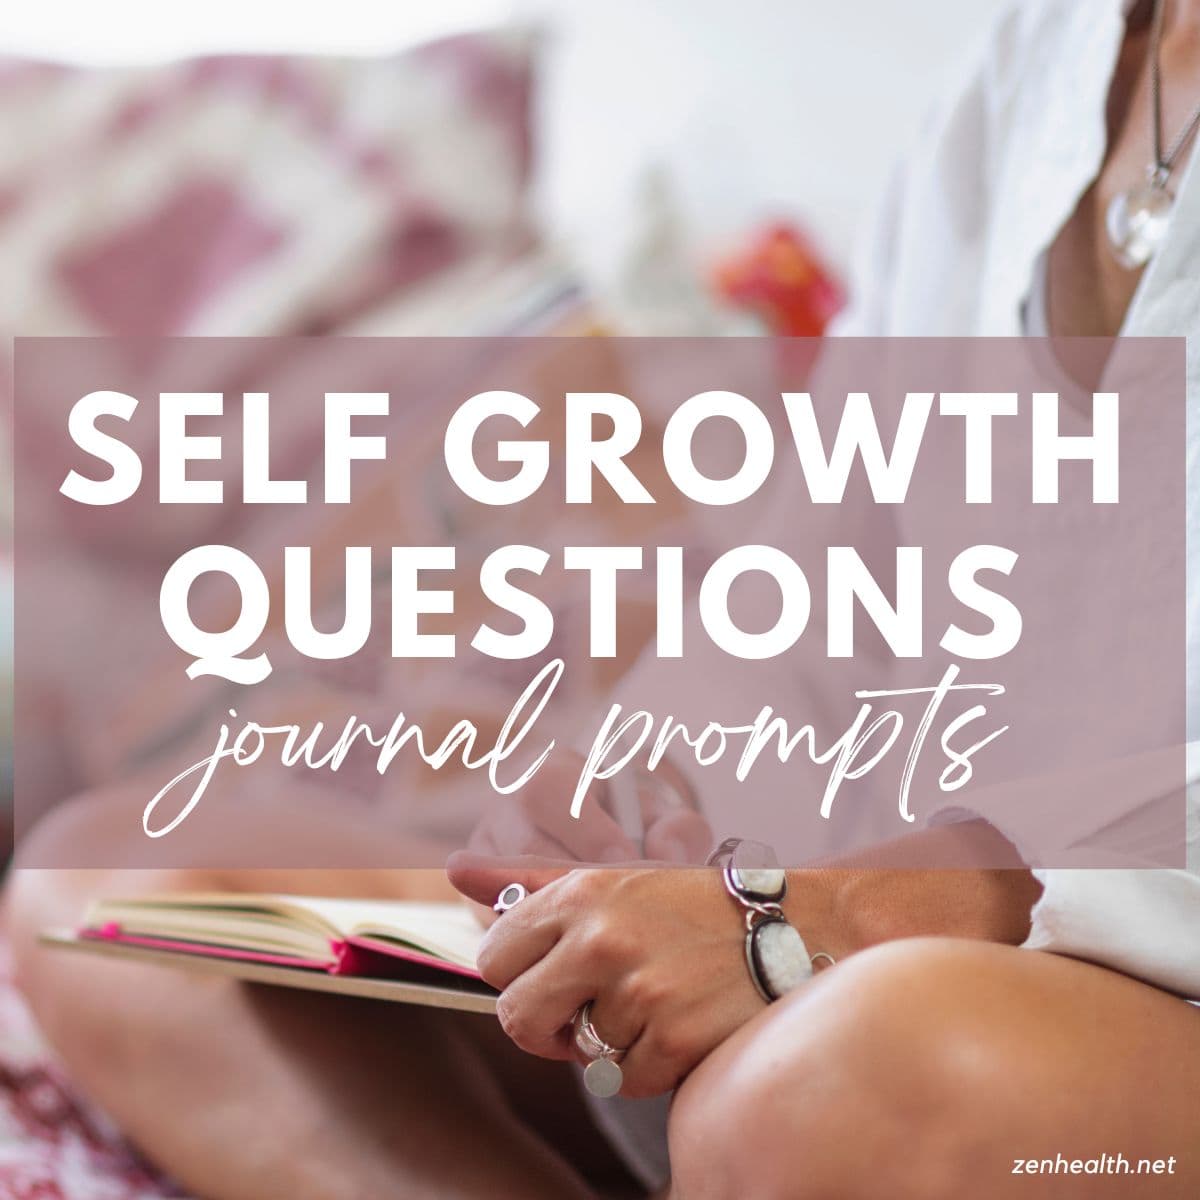 self growth questions journal prompts text overlay on a sitting woman writing in a notebook